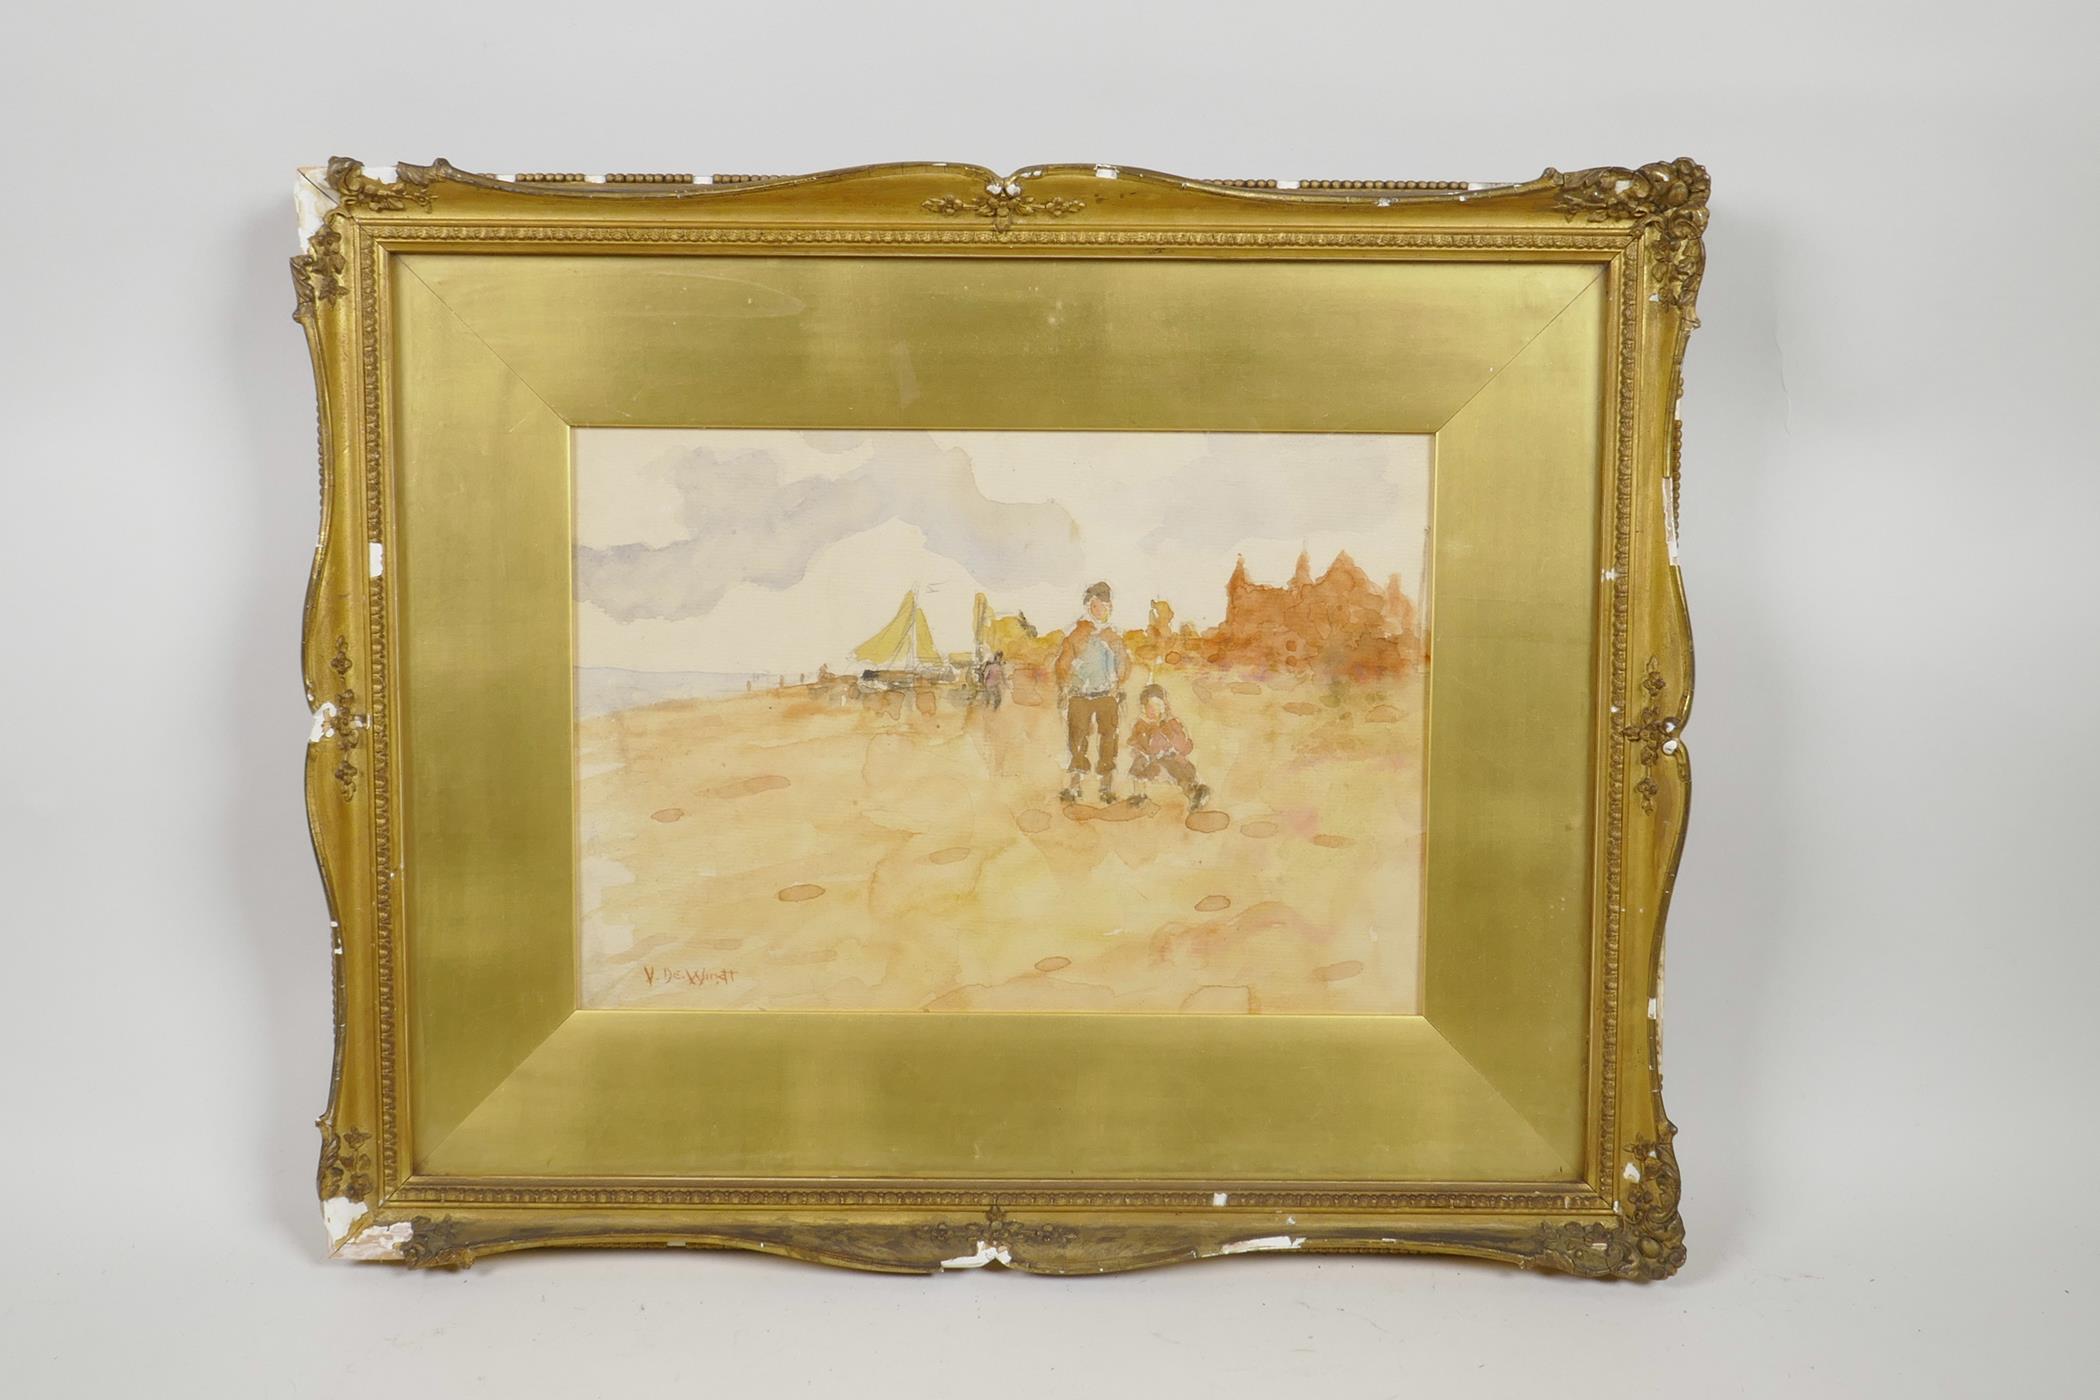 V. De Windt, beach scene with fishing boats and children to foreground, signed, watercolour, 7" x - Image 2 of 4